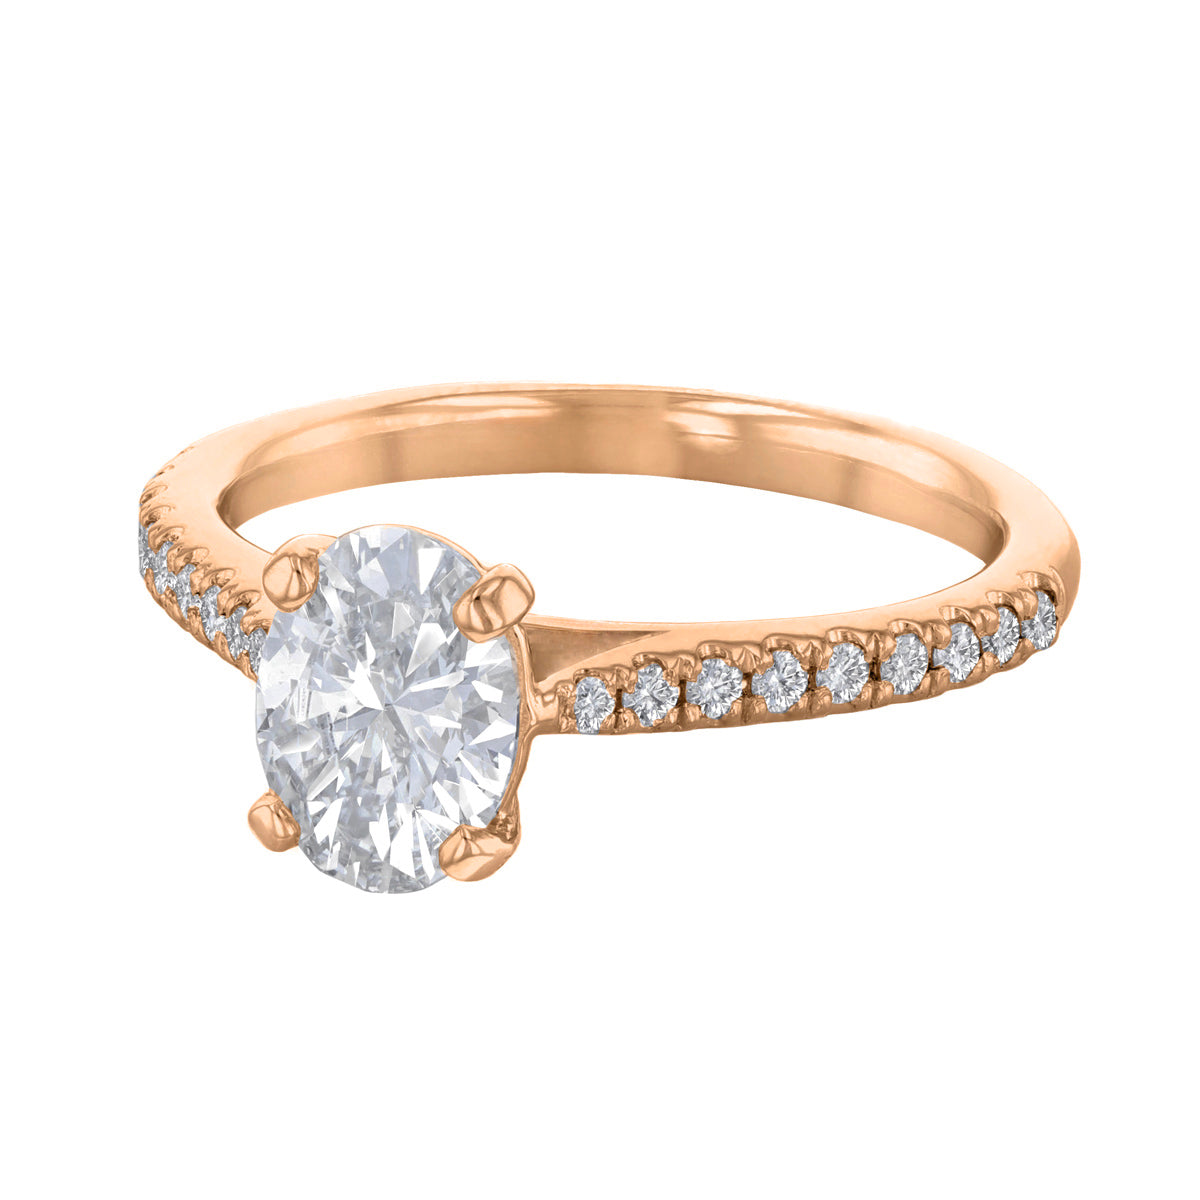 0-35ct-ophelia-shoulder-set-oval-cut-solitaire-diamond-engagement-ring-18ct-rose-gold